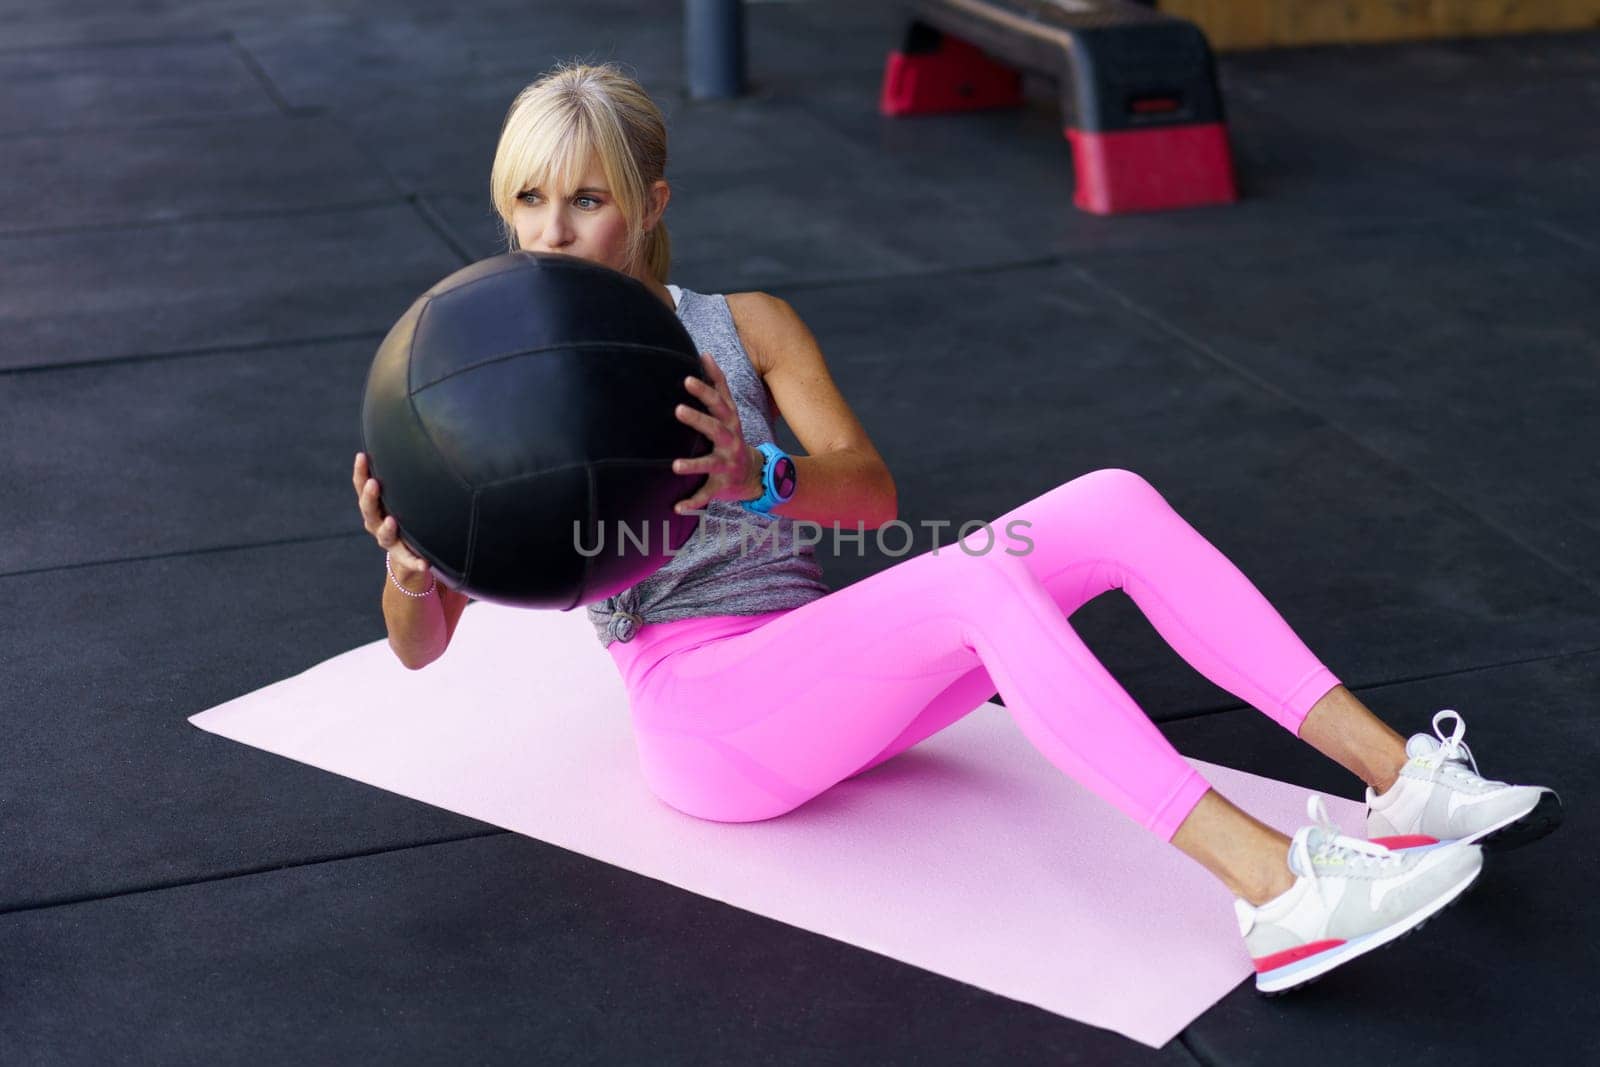 Side view of adult female athlete in sportswear and sneakers, looking away while sitting on mat on gym floor and doing exercise with medicine ball during workout in daylight